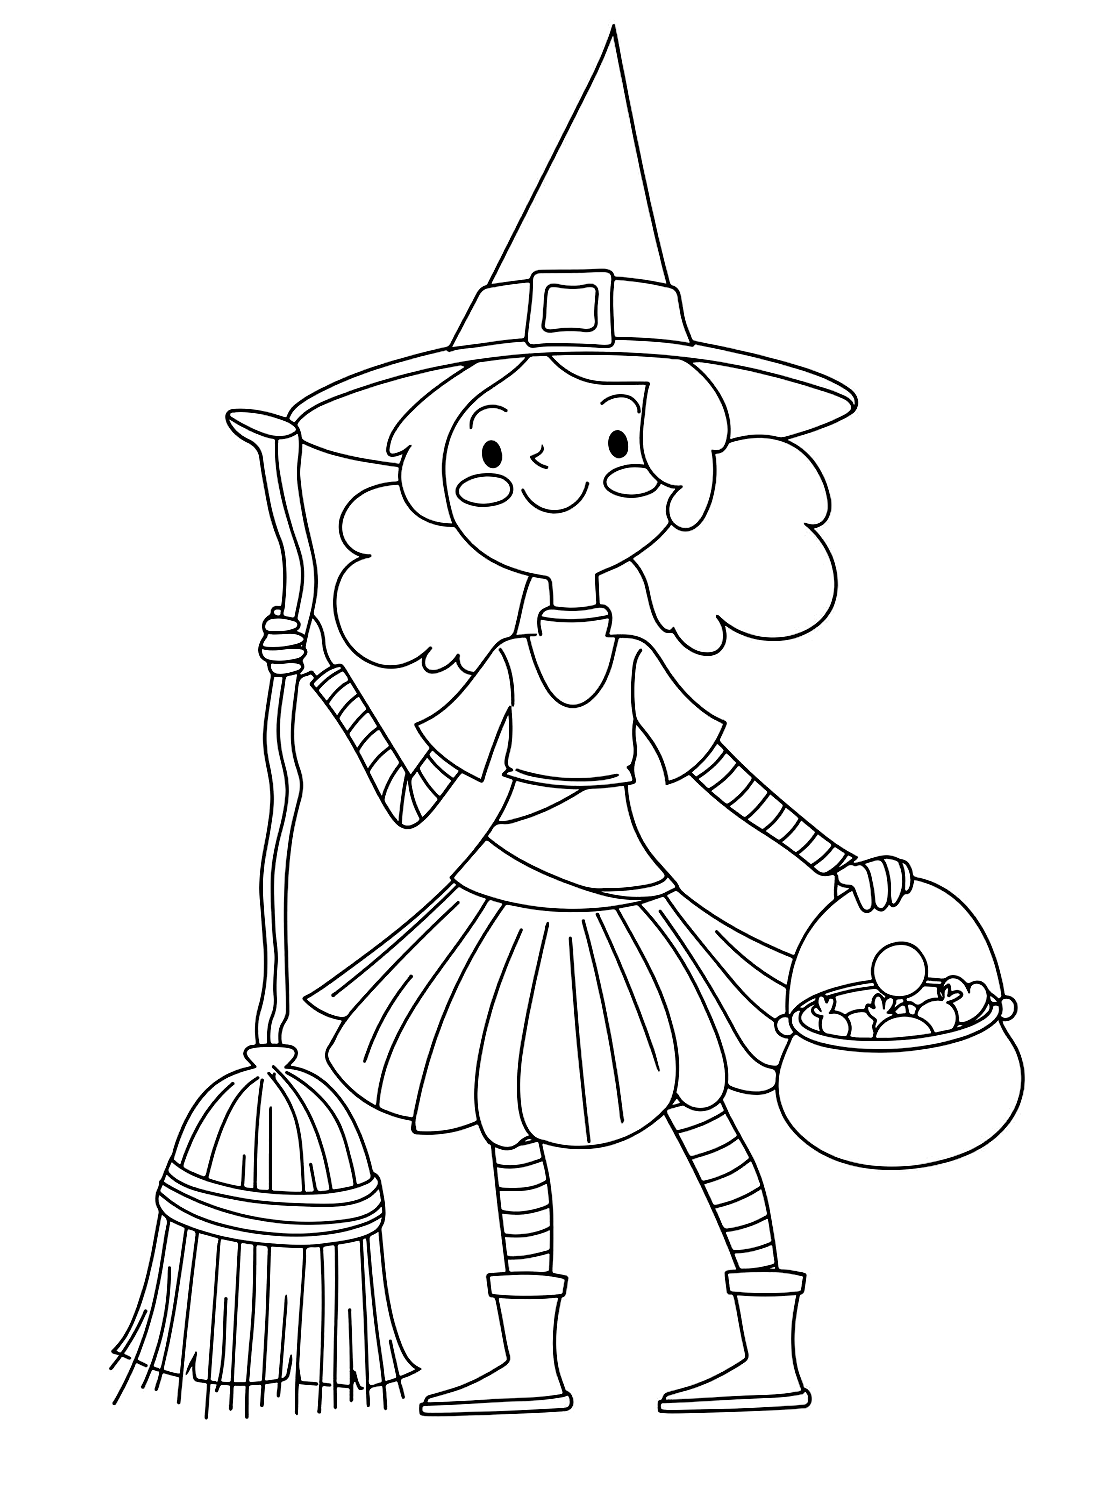 Lovely Witch coloring page